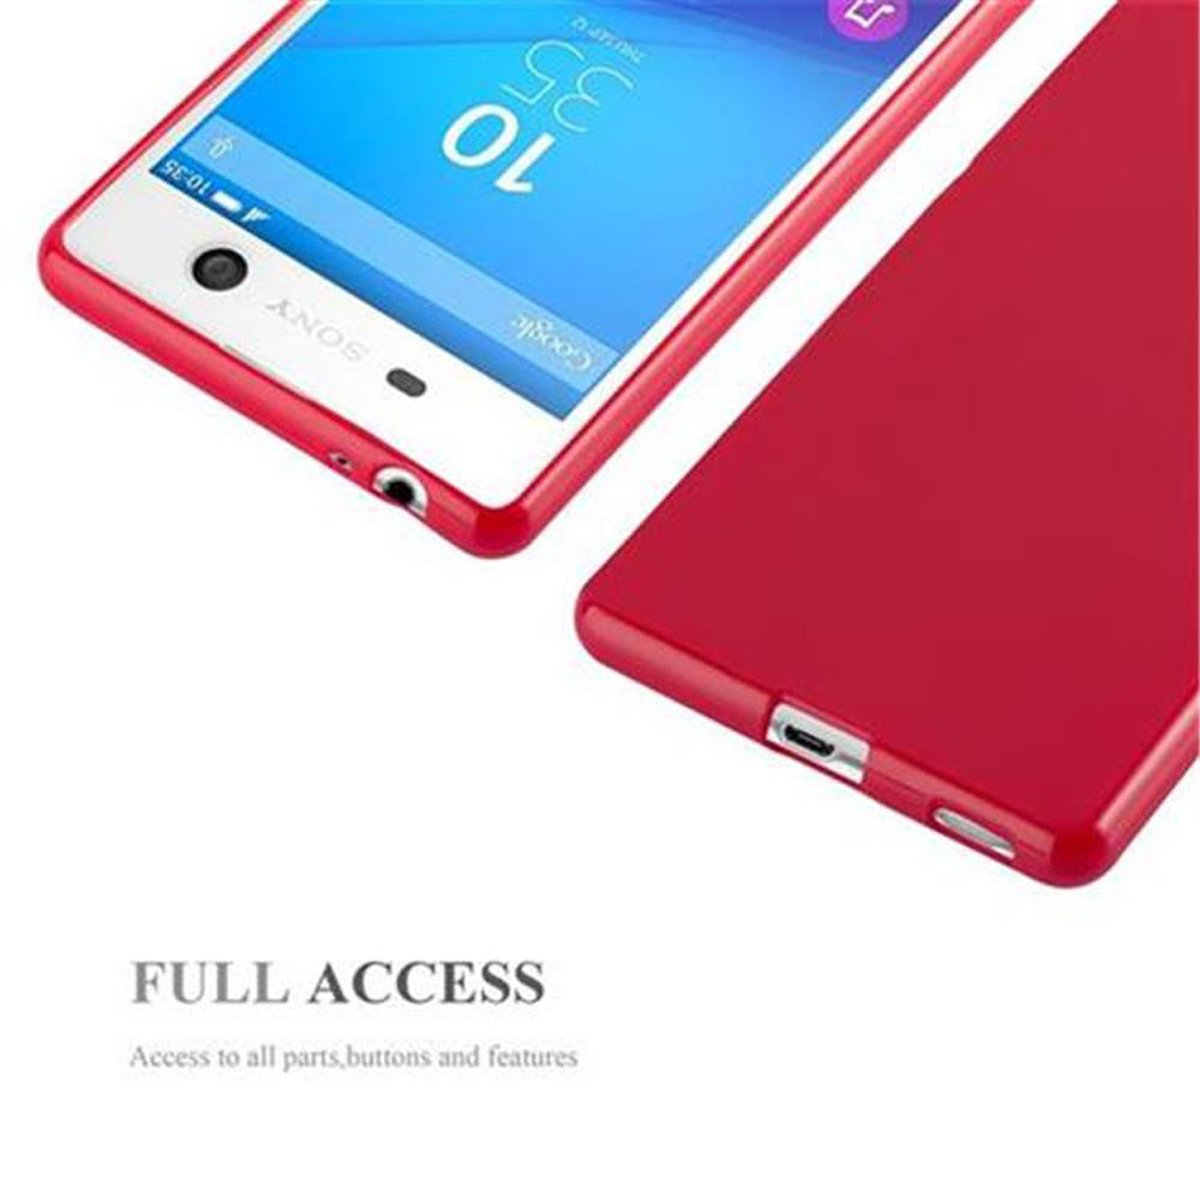 ROT Jelly Sony, CADORABO JELLY TPU Xperia Handyhülle, Backcover, M5,